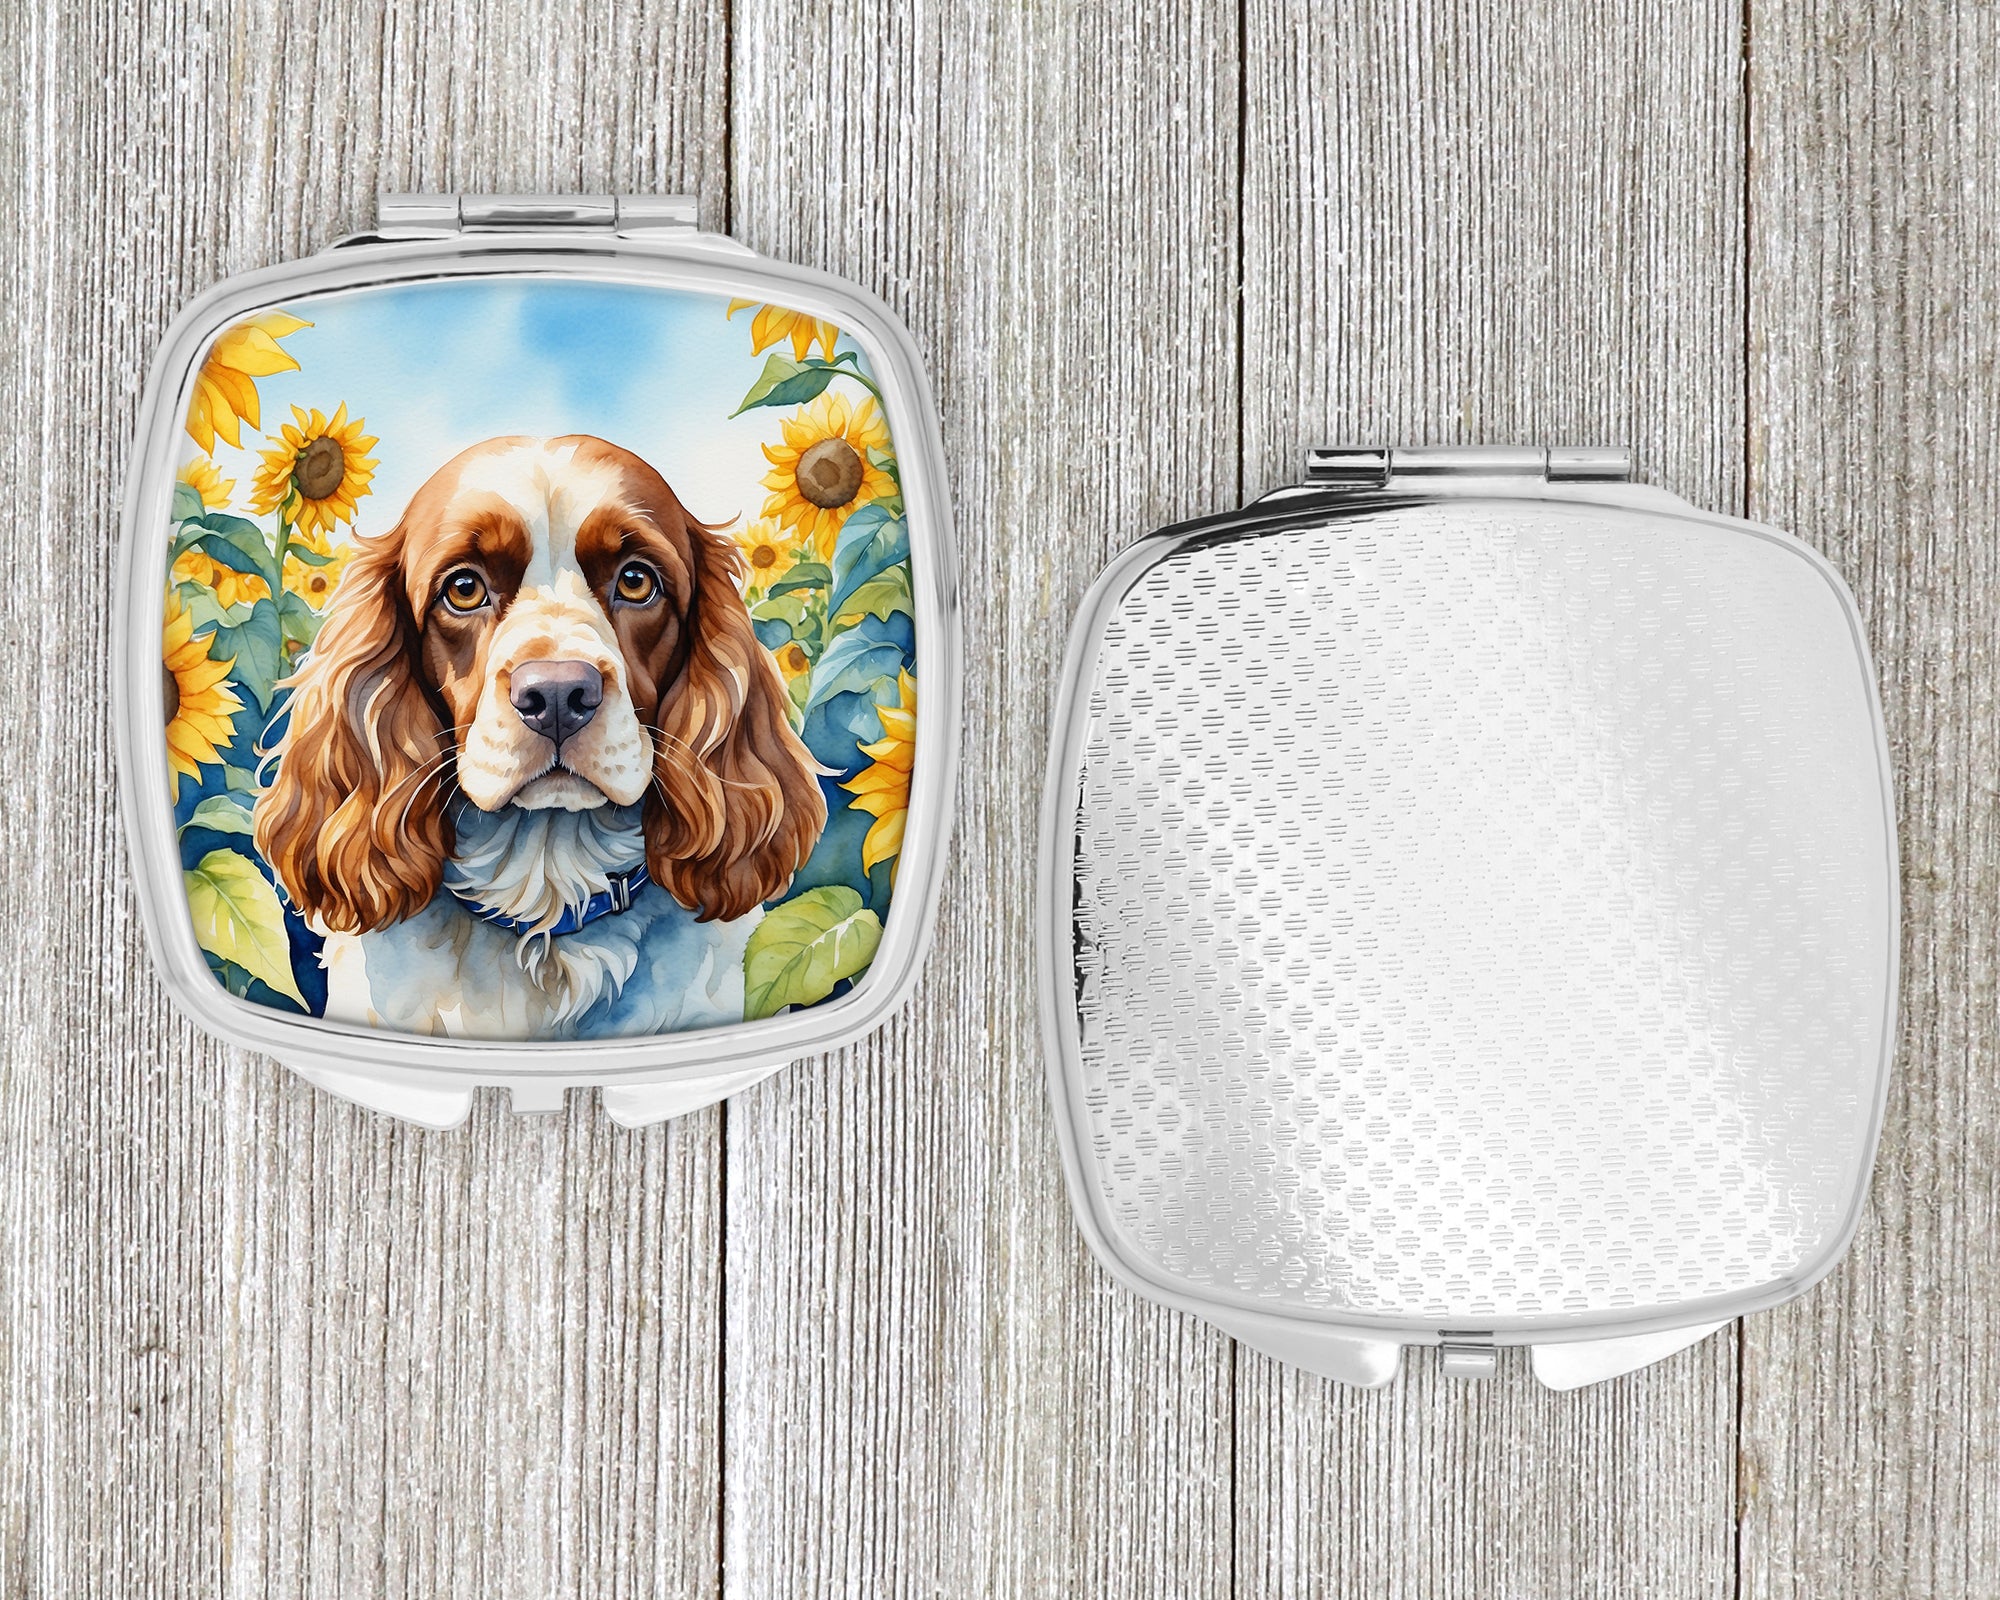 Cocker Spaniel in Sunflowers Compact Mirror